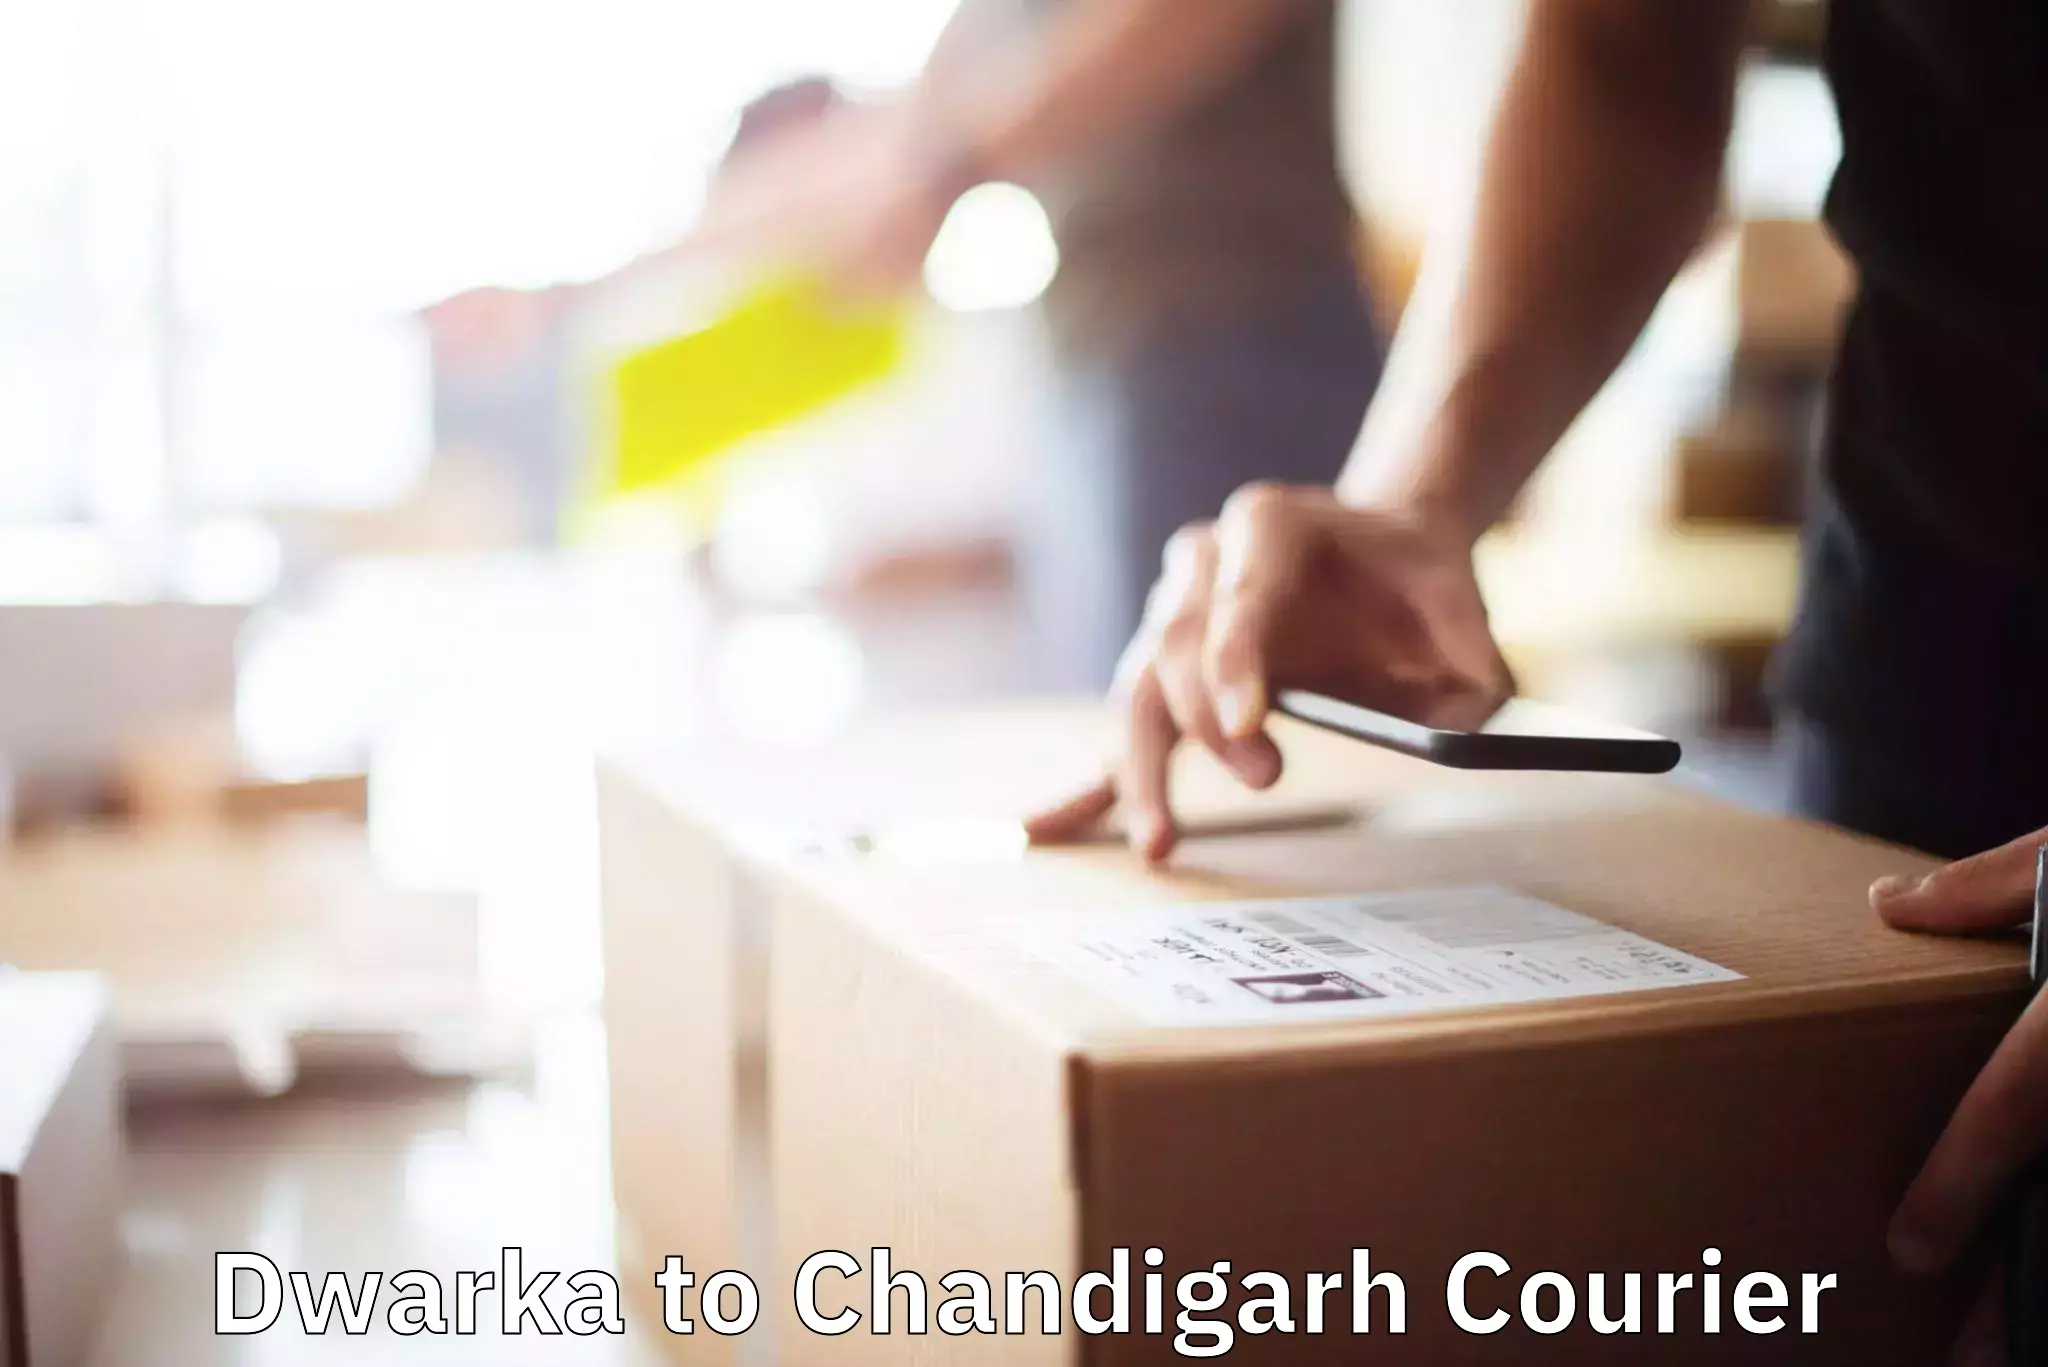 Trusted relocation experts Dwarka to Chandigarh